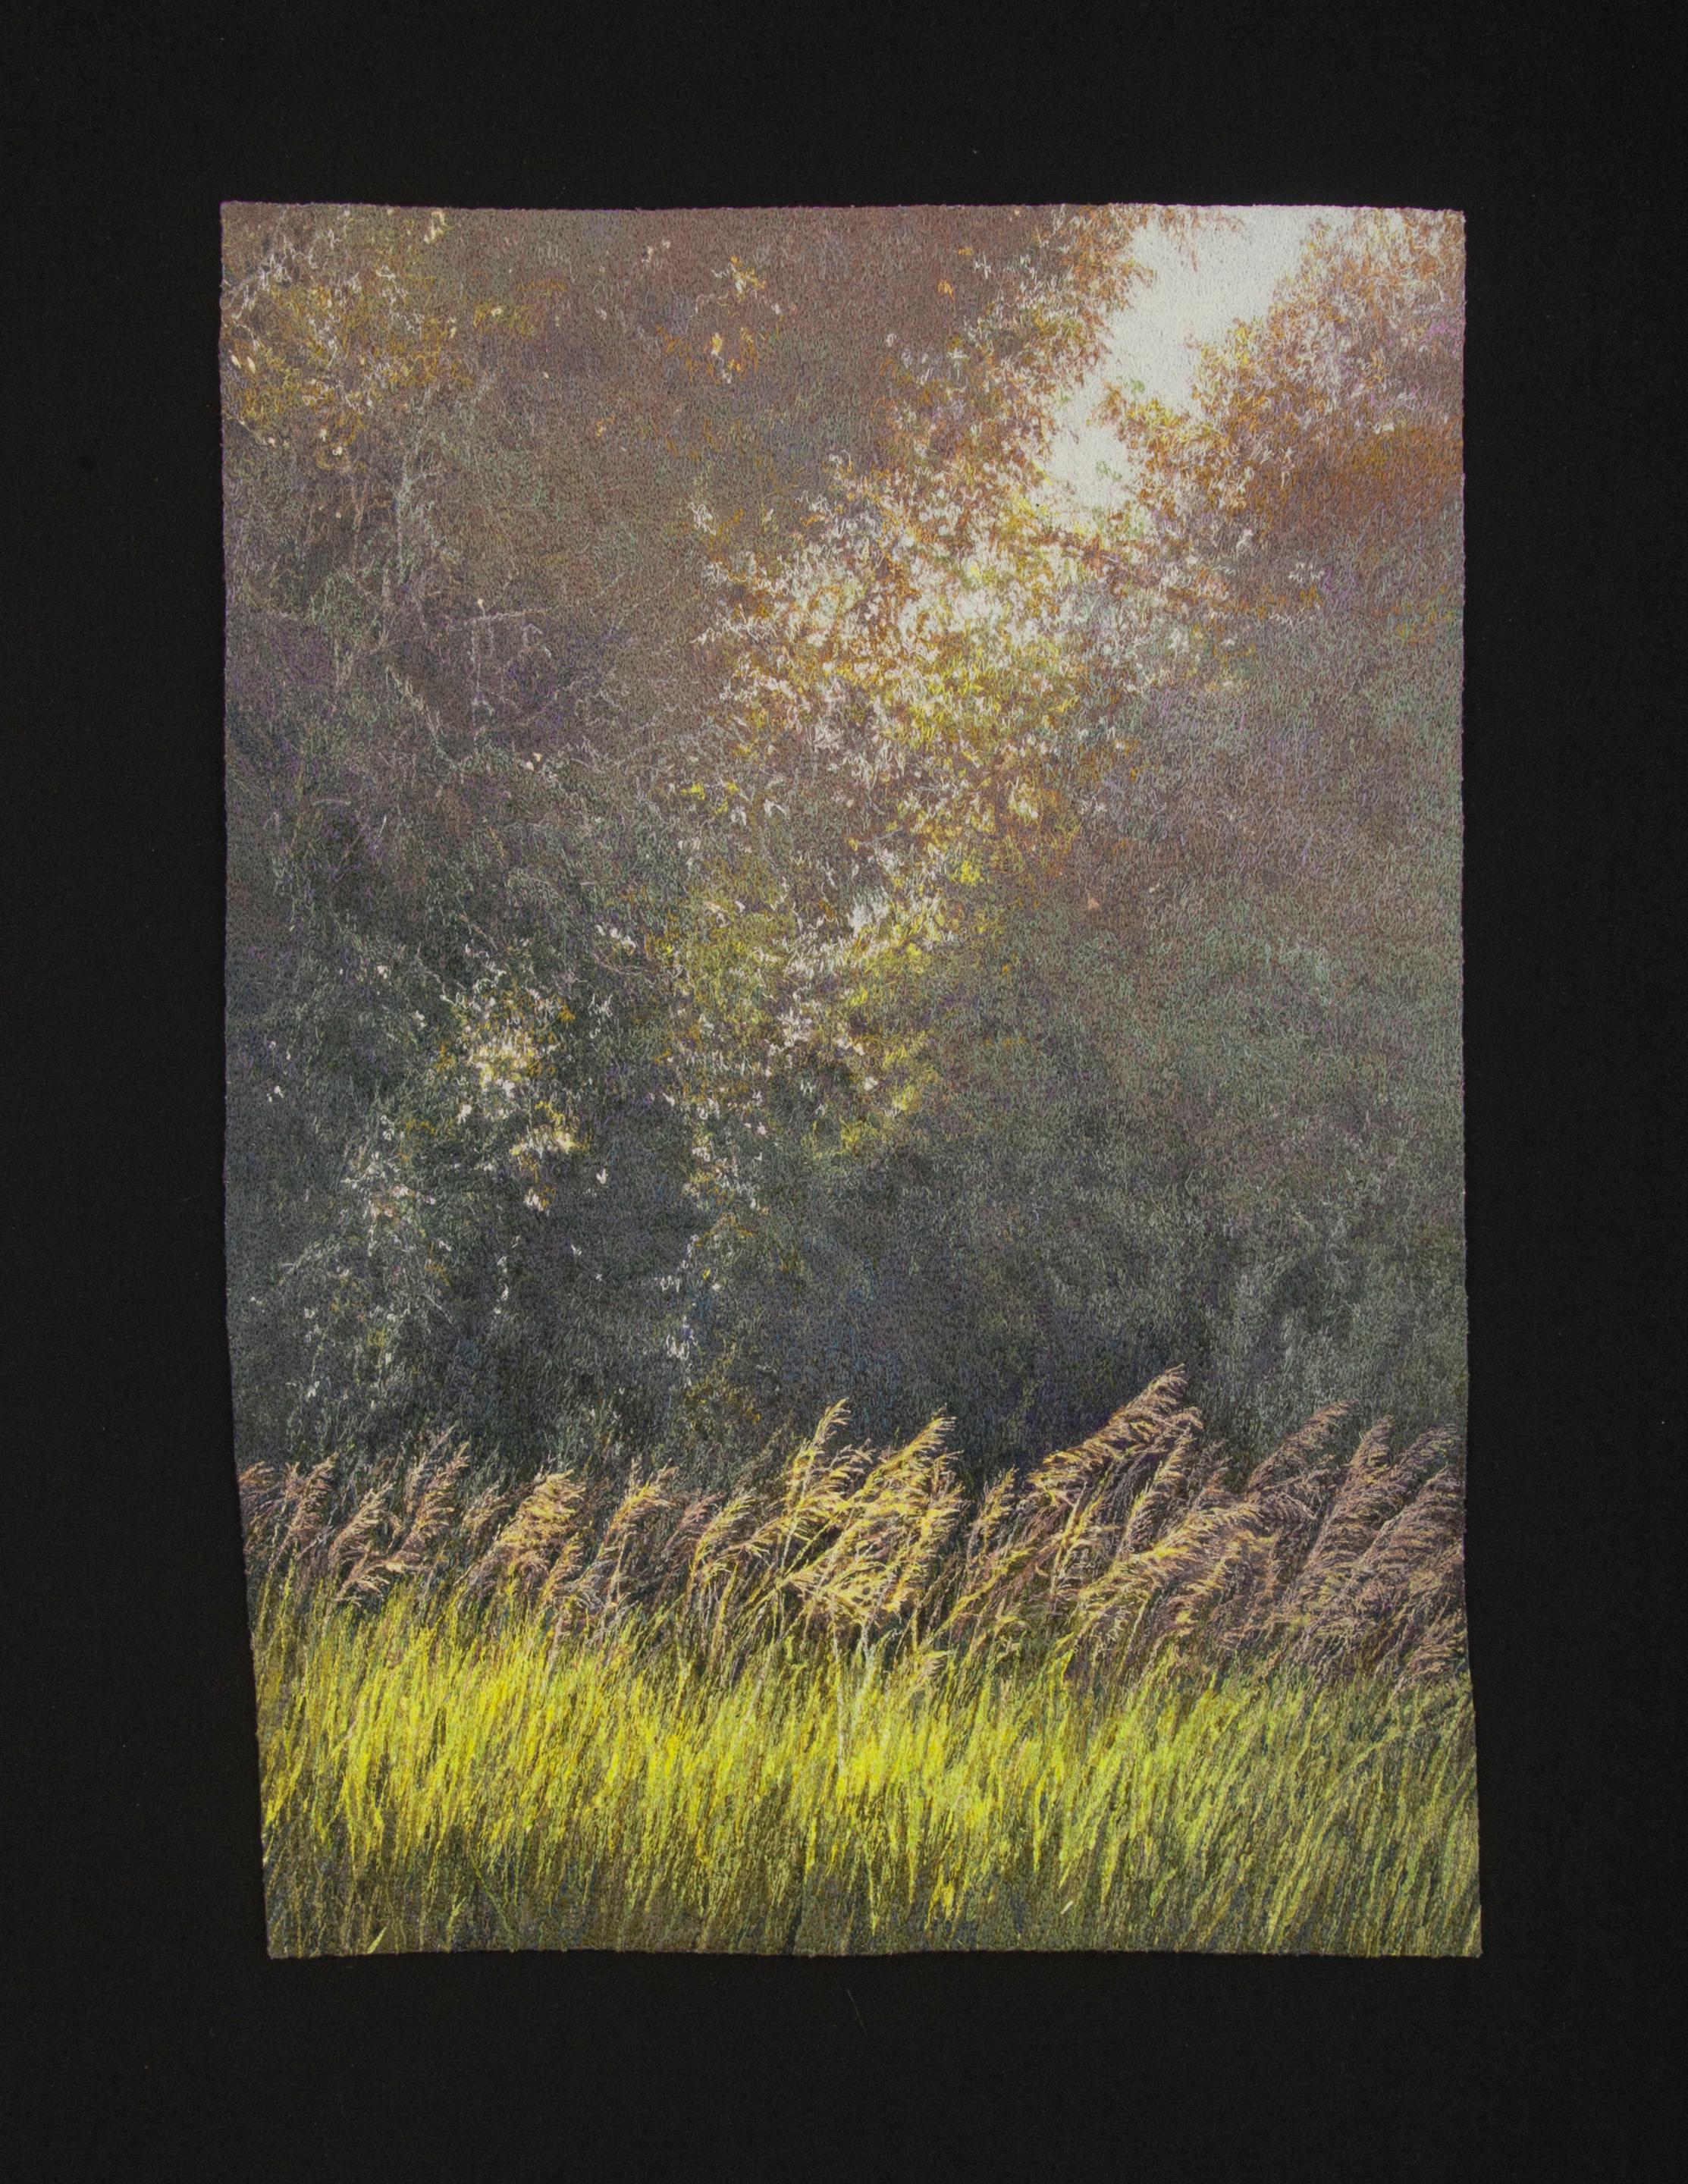 "Trees and Grasses", Contemporary, Embroidery, Photorealism, Framed, Textile